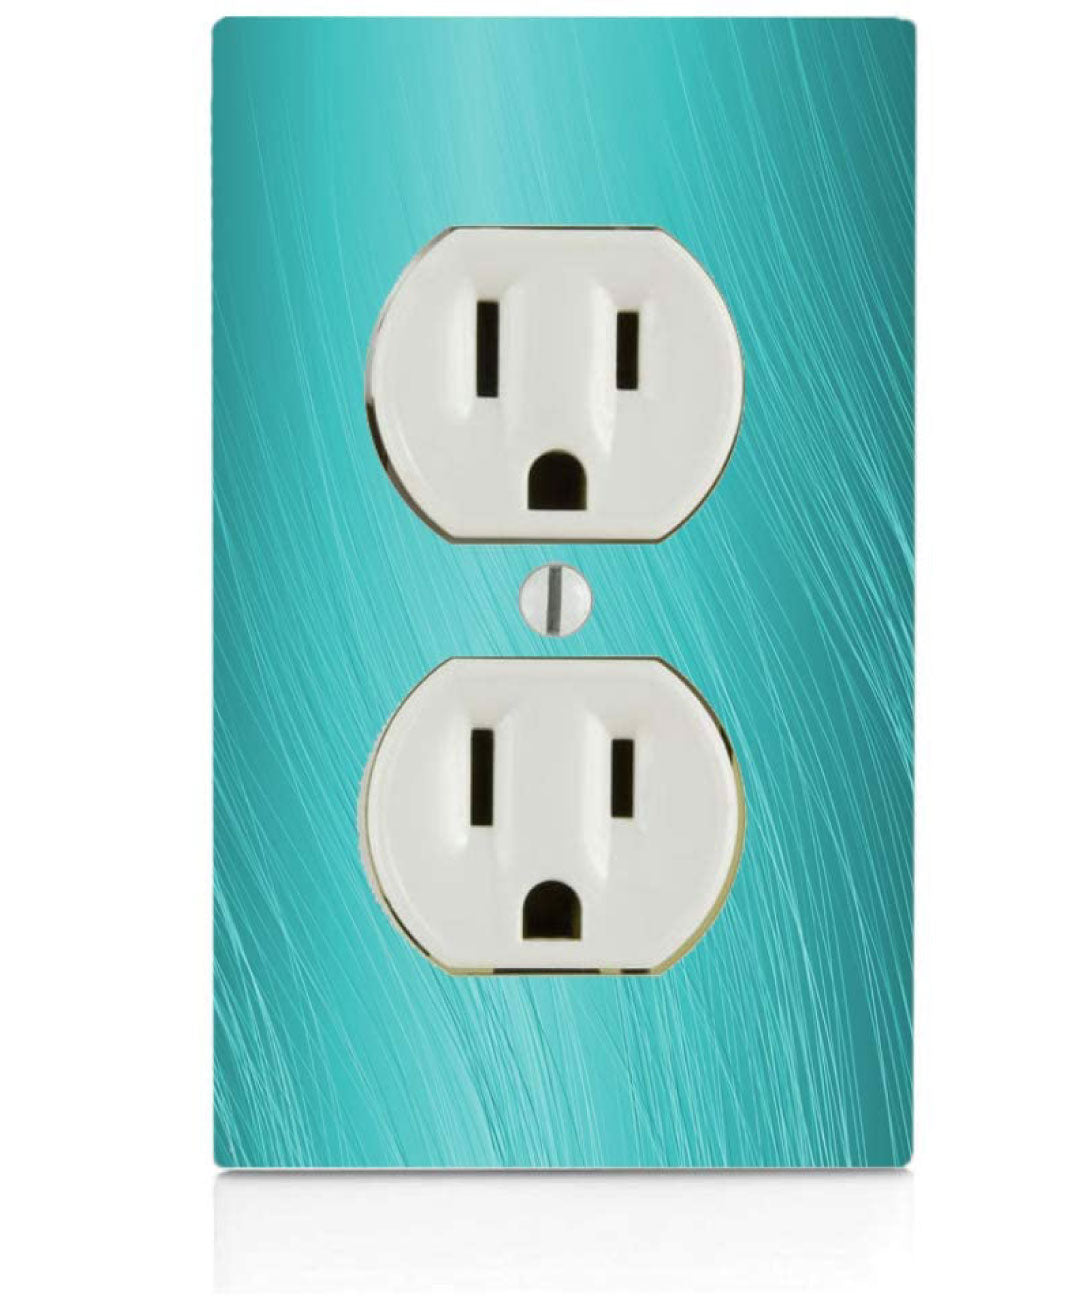 Wavy Lines Design Blue Teal Aqua, Plastic Electrical Outlet Wall Plate, 2.75 x 4.5 inches